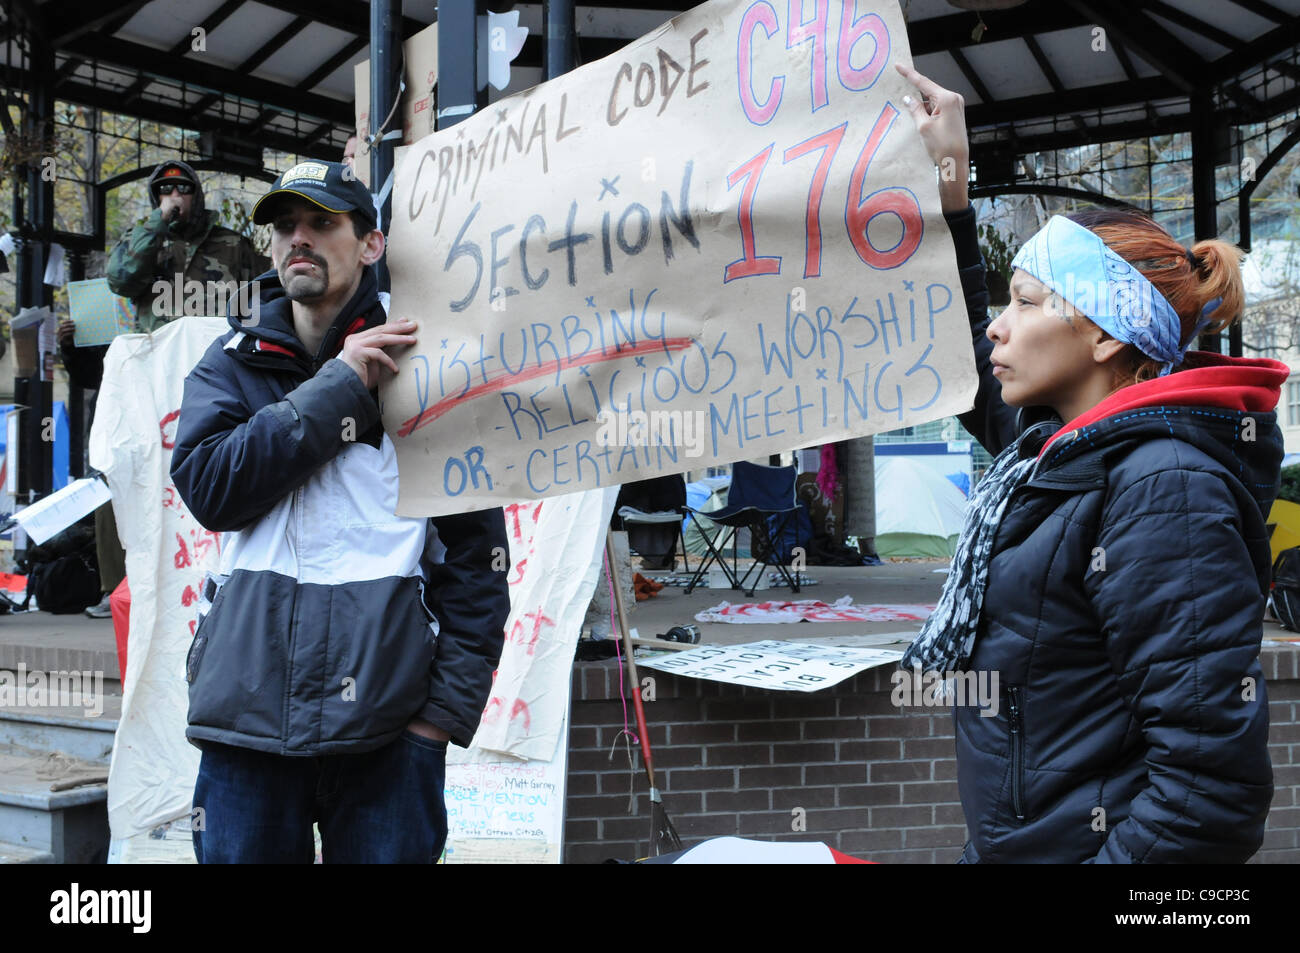 November 21, 2011, two unidentified native protesters hold up a sign citing Canada's criminal code at St. James park following the decision handed down this morning by Ontario Superior Court judge David Brown, upholding the Occupy Toronto tent camp eviction. Stock Photo